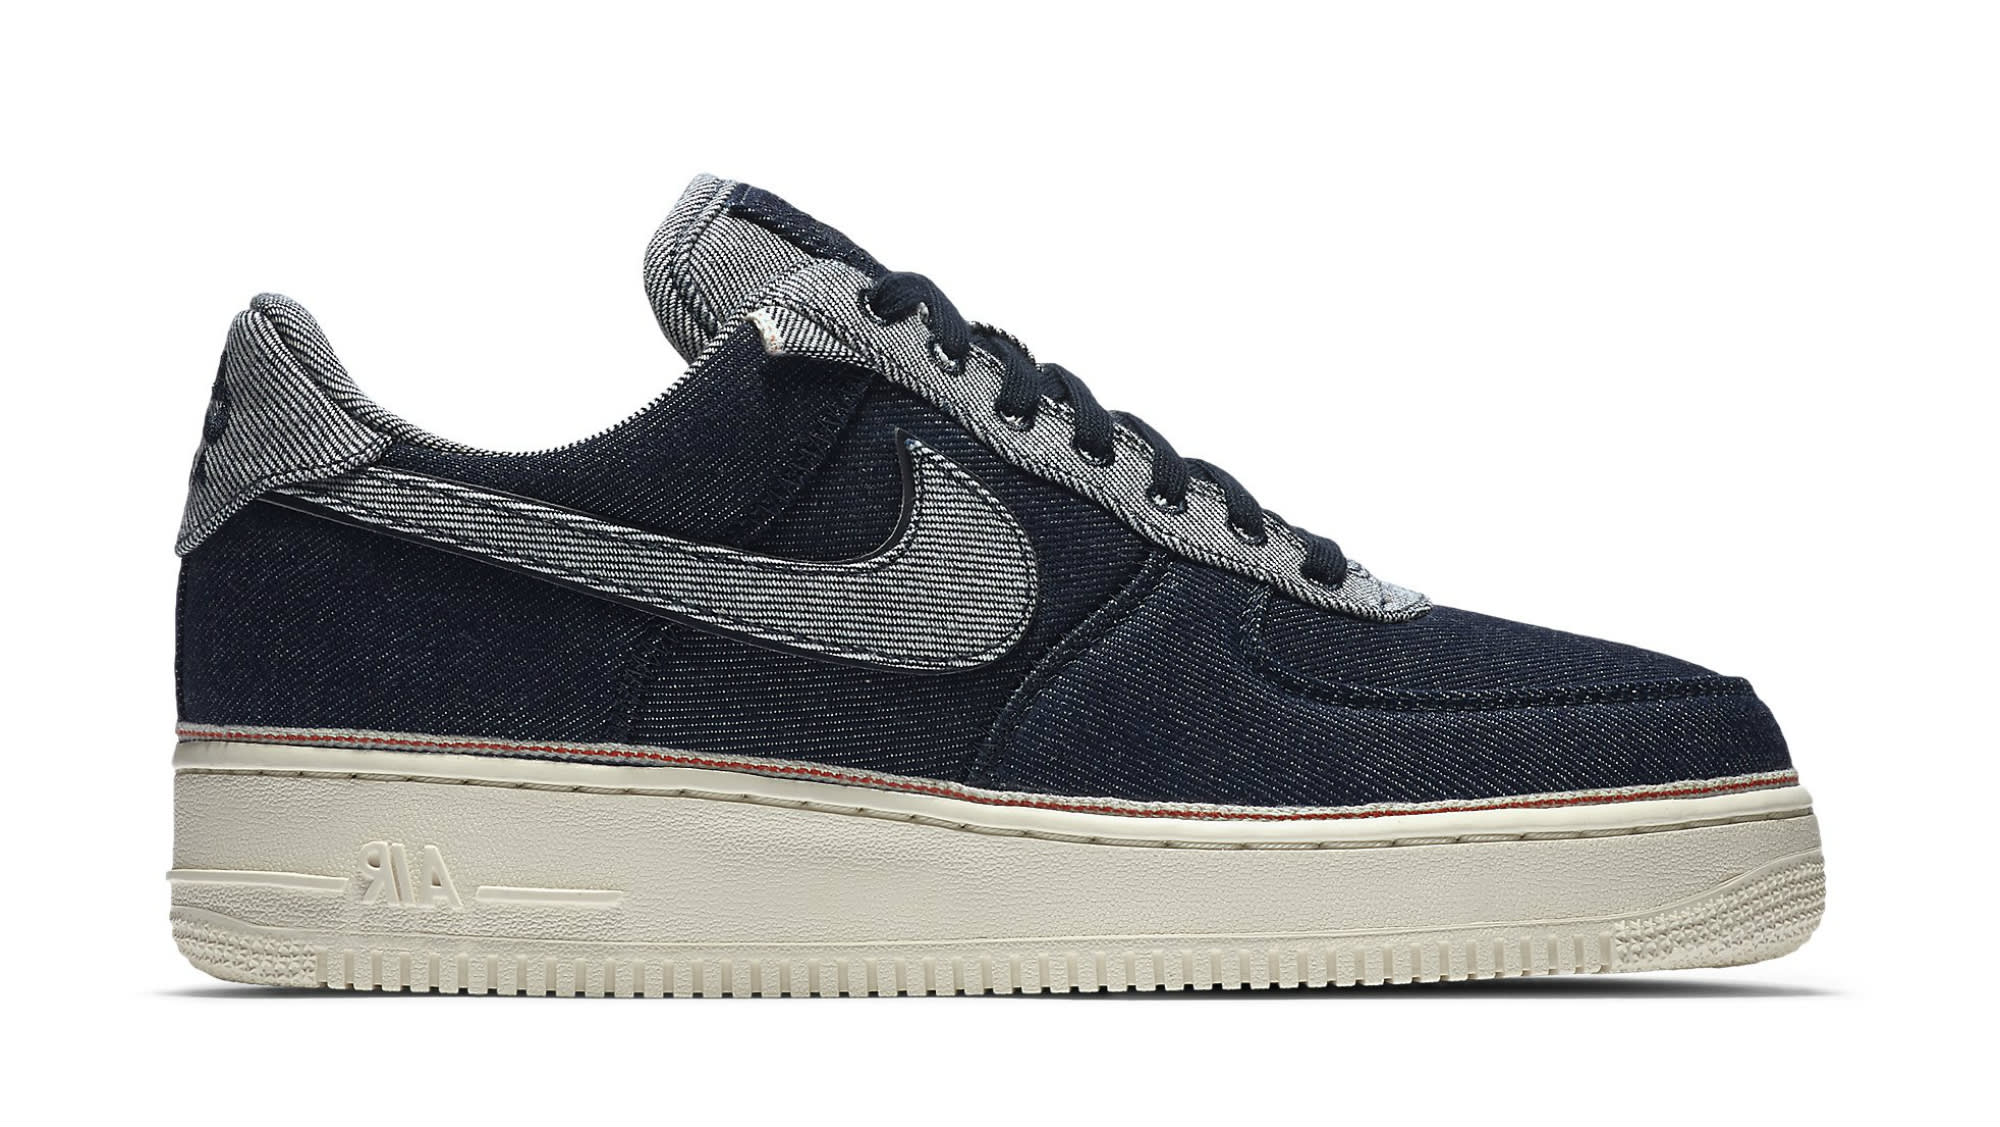 3x1-nike-air-force-1-low-raw-indigo-905345-402-release-date